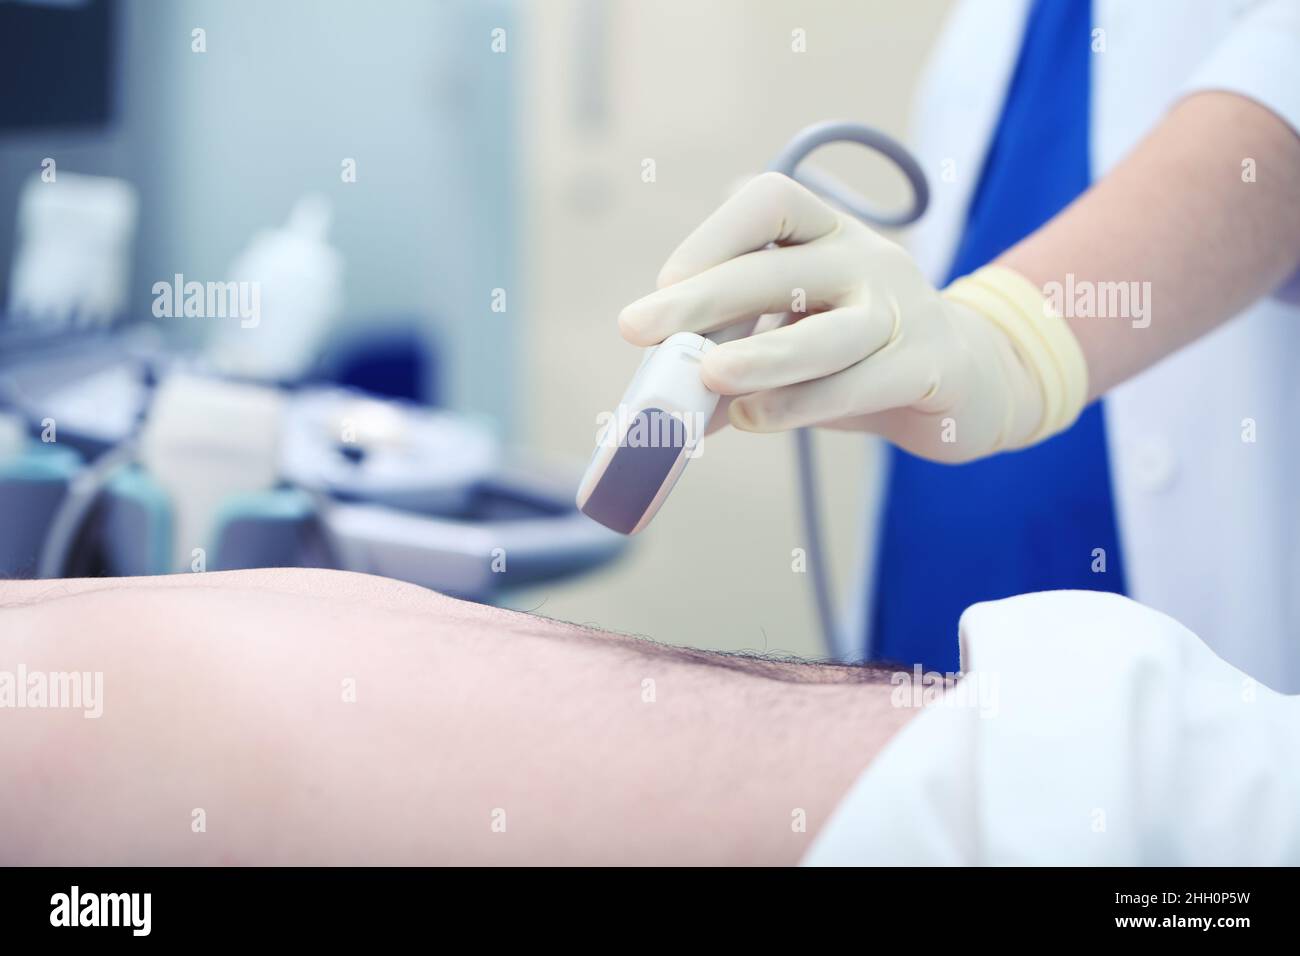 Female doctor in the work wear holds with gloved hands ultrasound device over the male patient body. Stock Photo